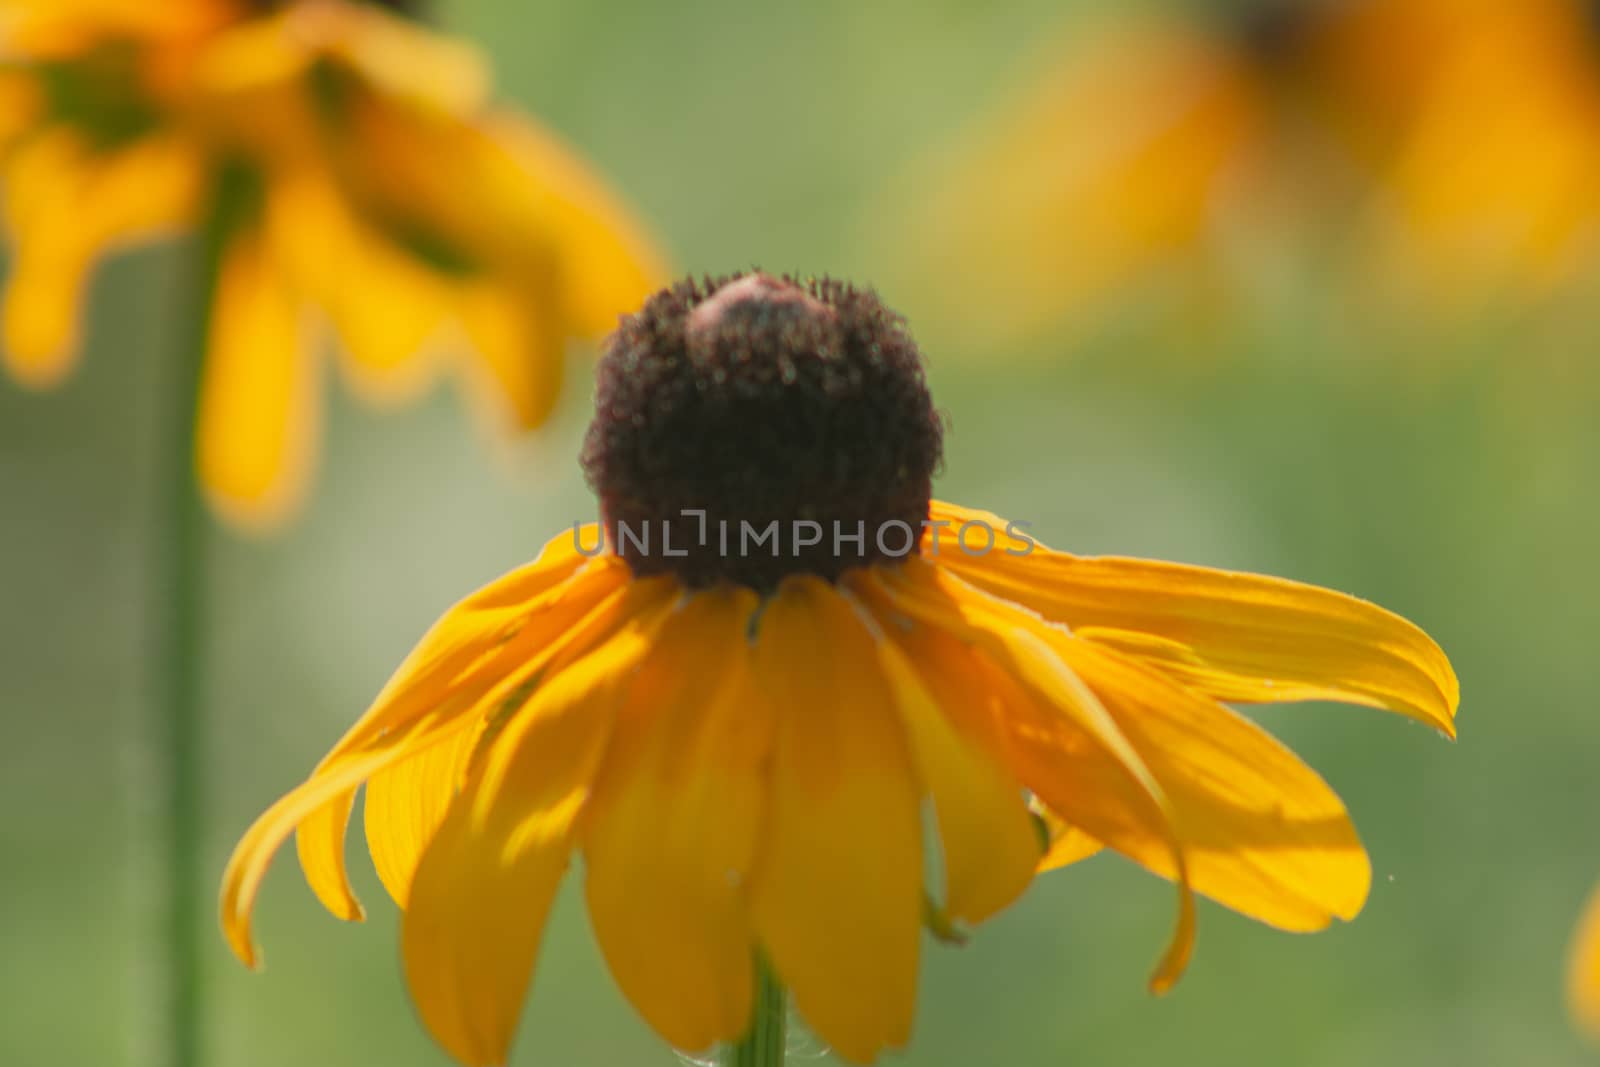 black eye susan wild flowers beautiful images perfect for magazine or website usage